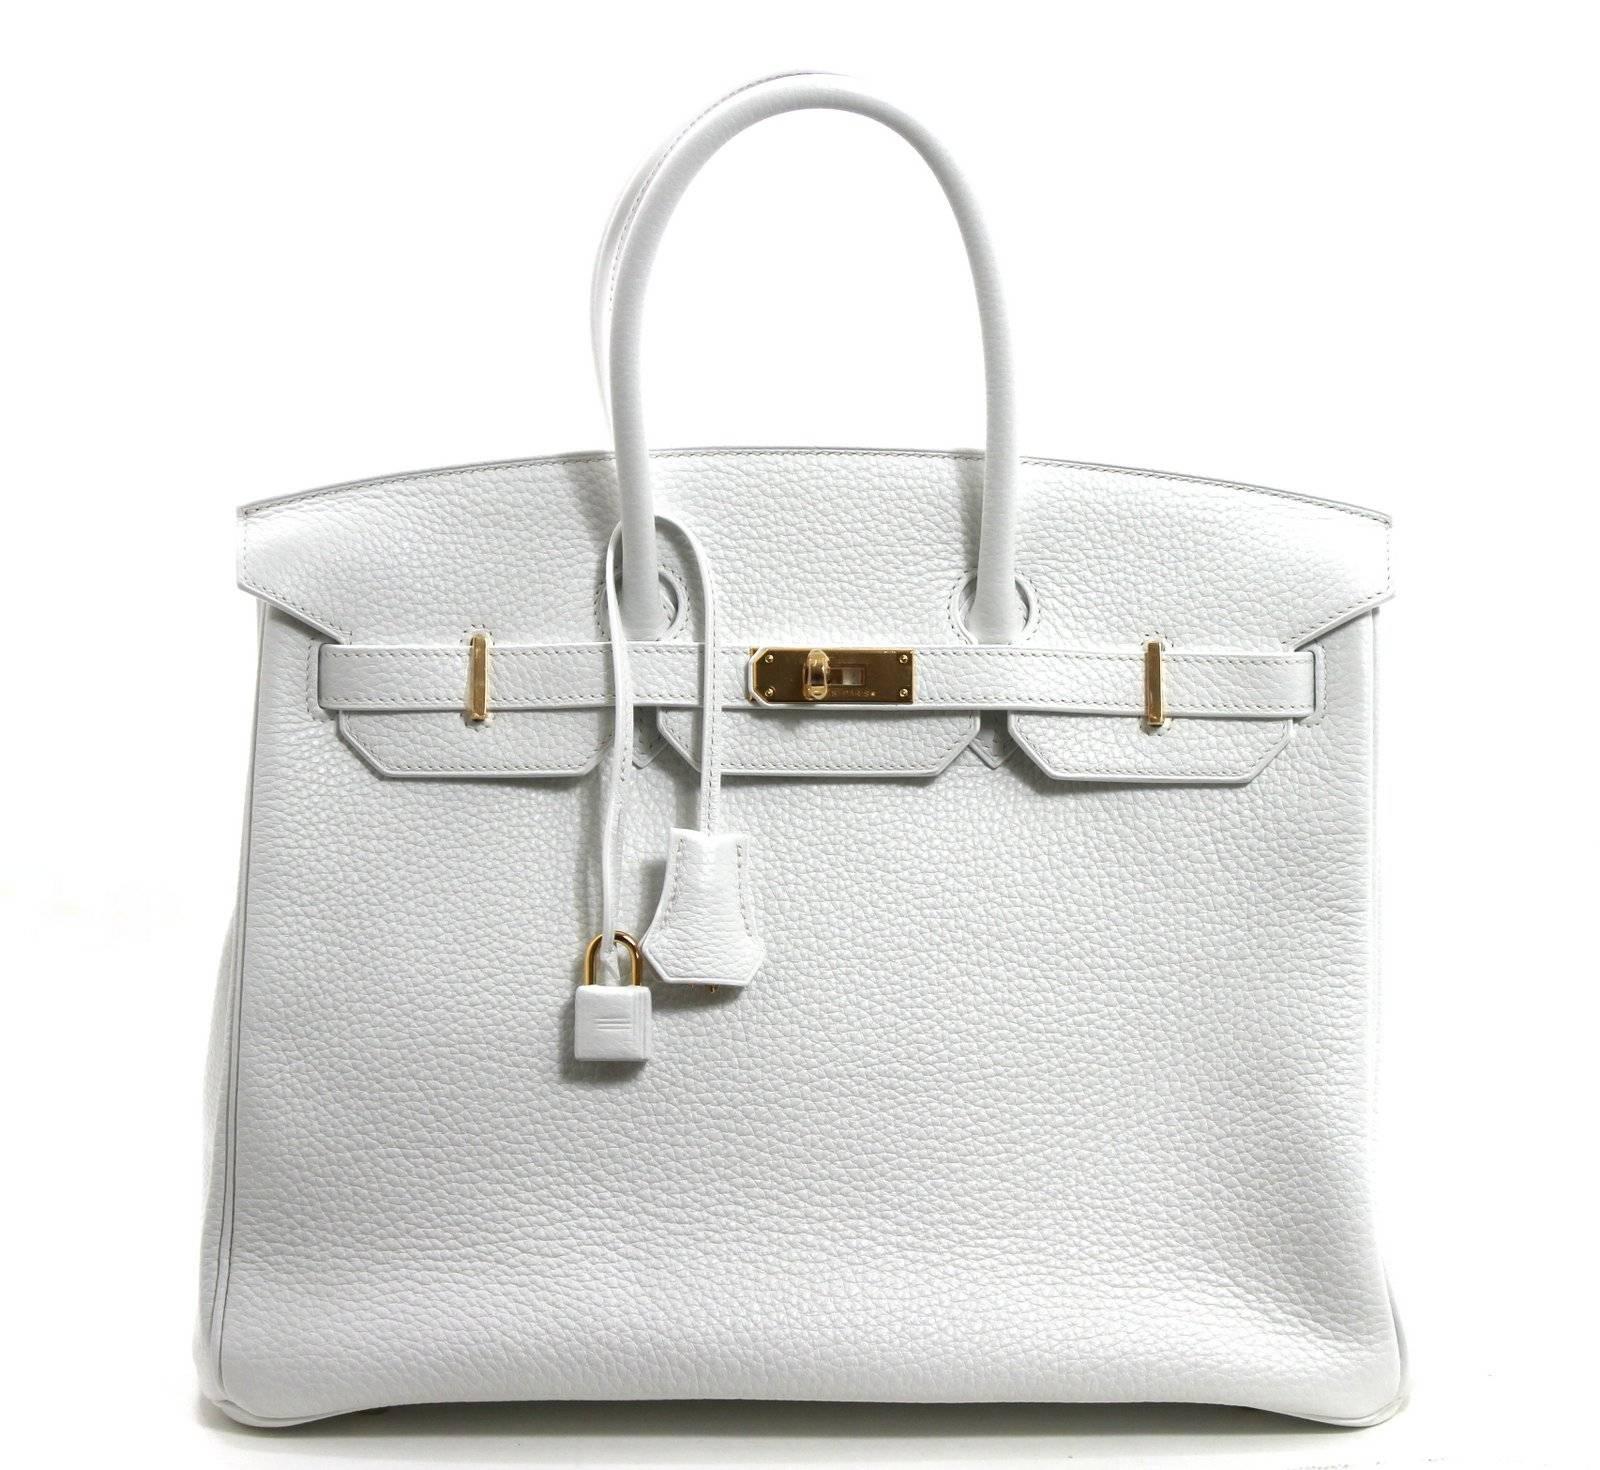 Gray Hermès WHITE Clemence Birkin Bag- 35 cm with GHW, T stamp For Sale